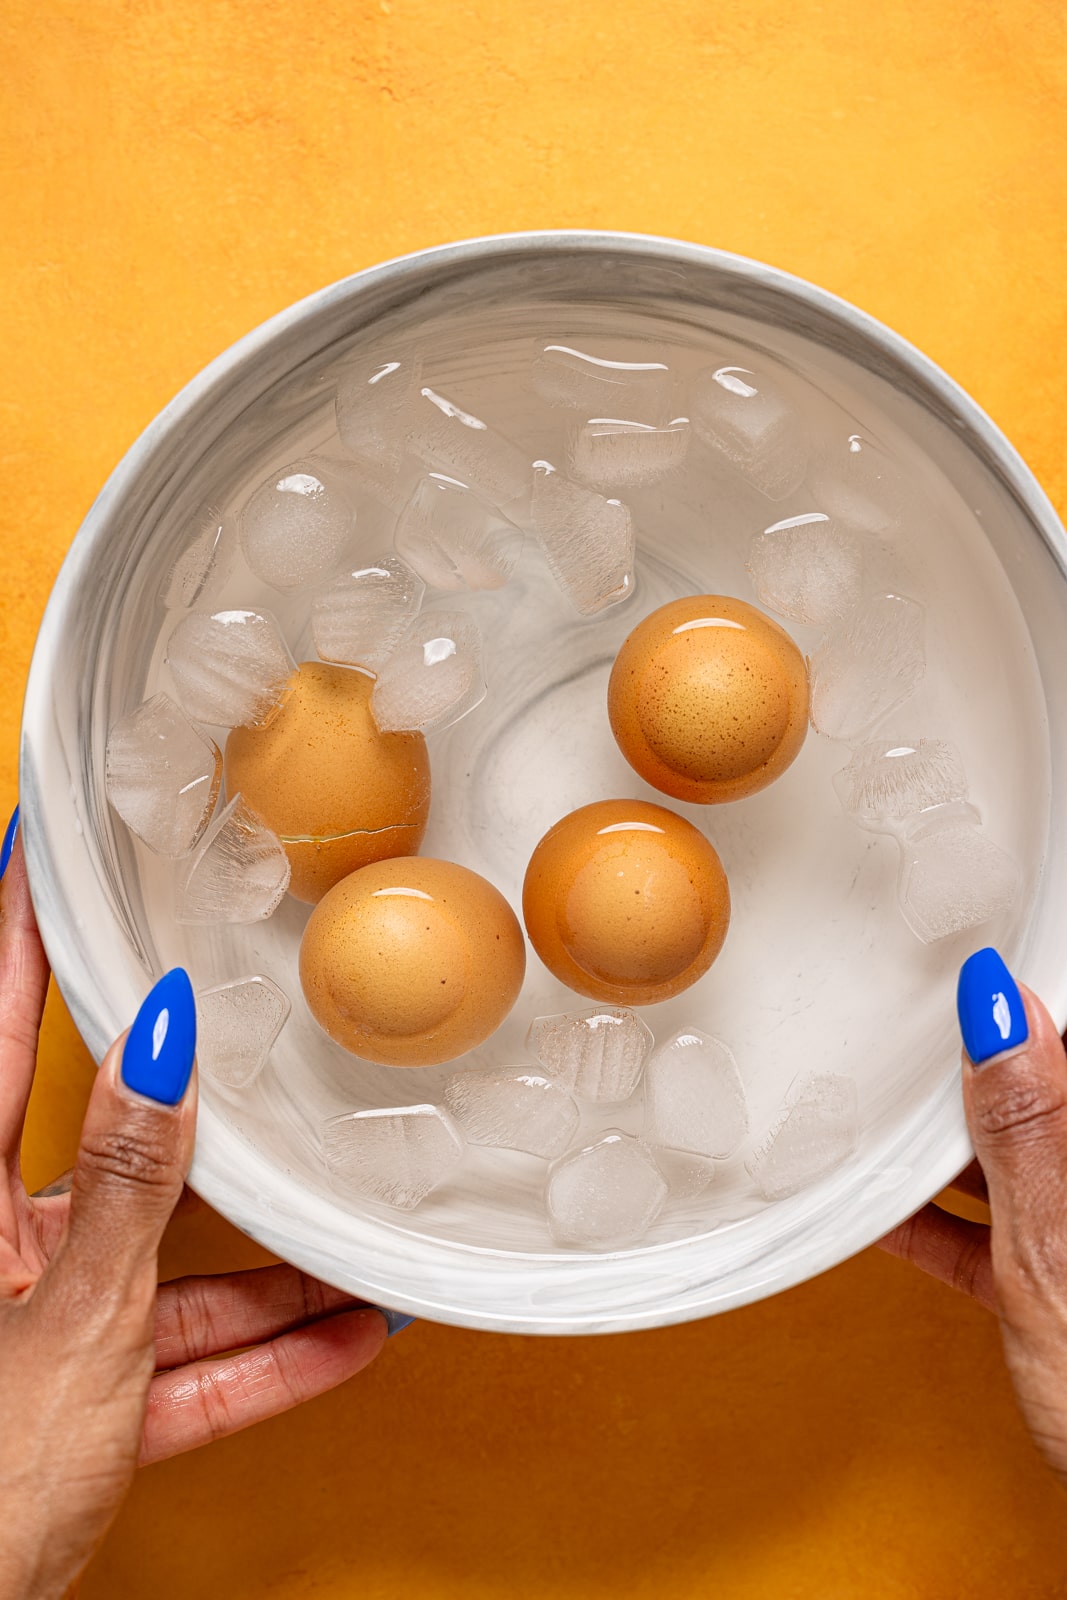 Cooked boiled eggs in a cold water bowl being held.